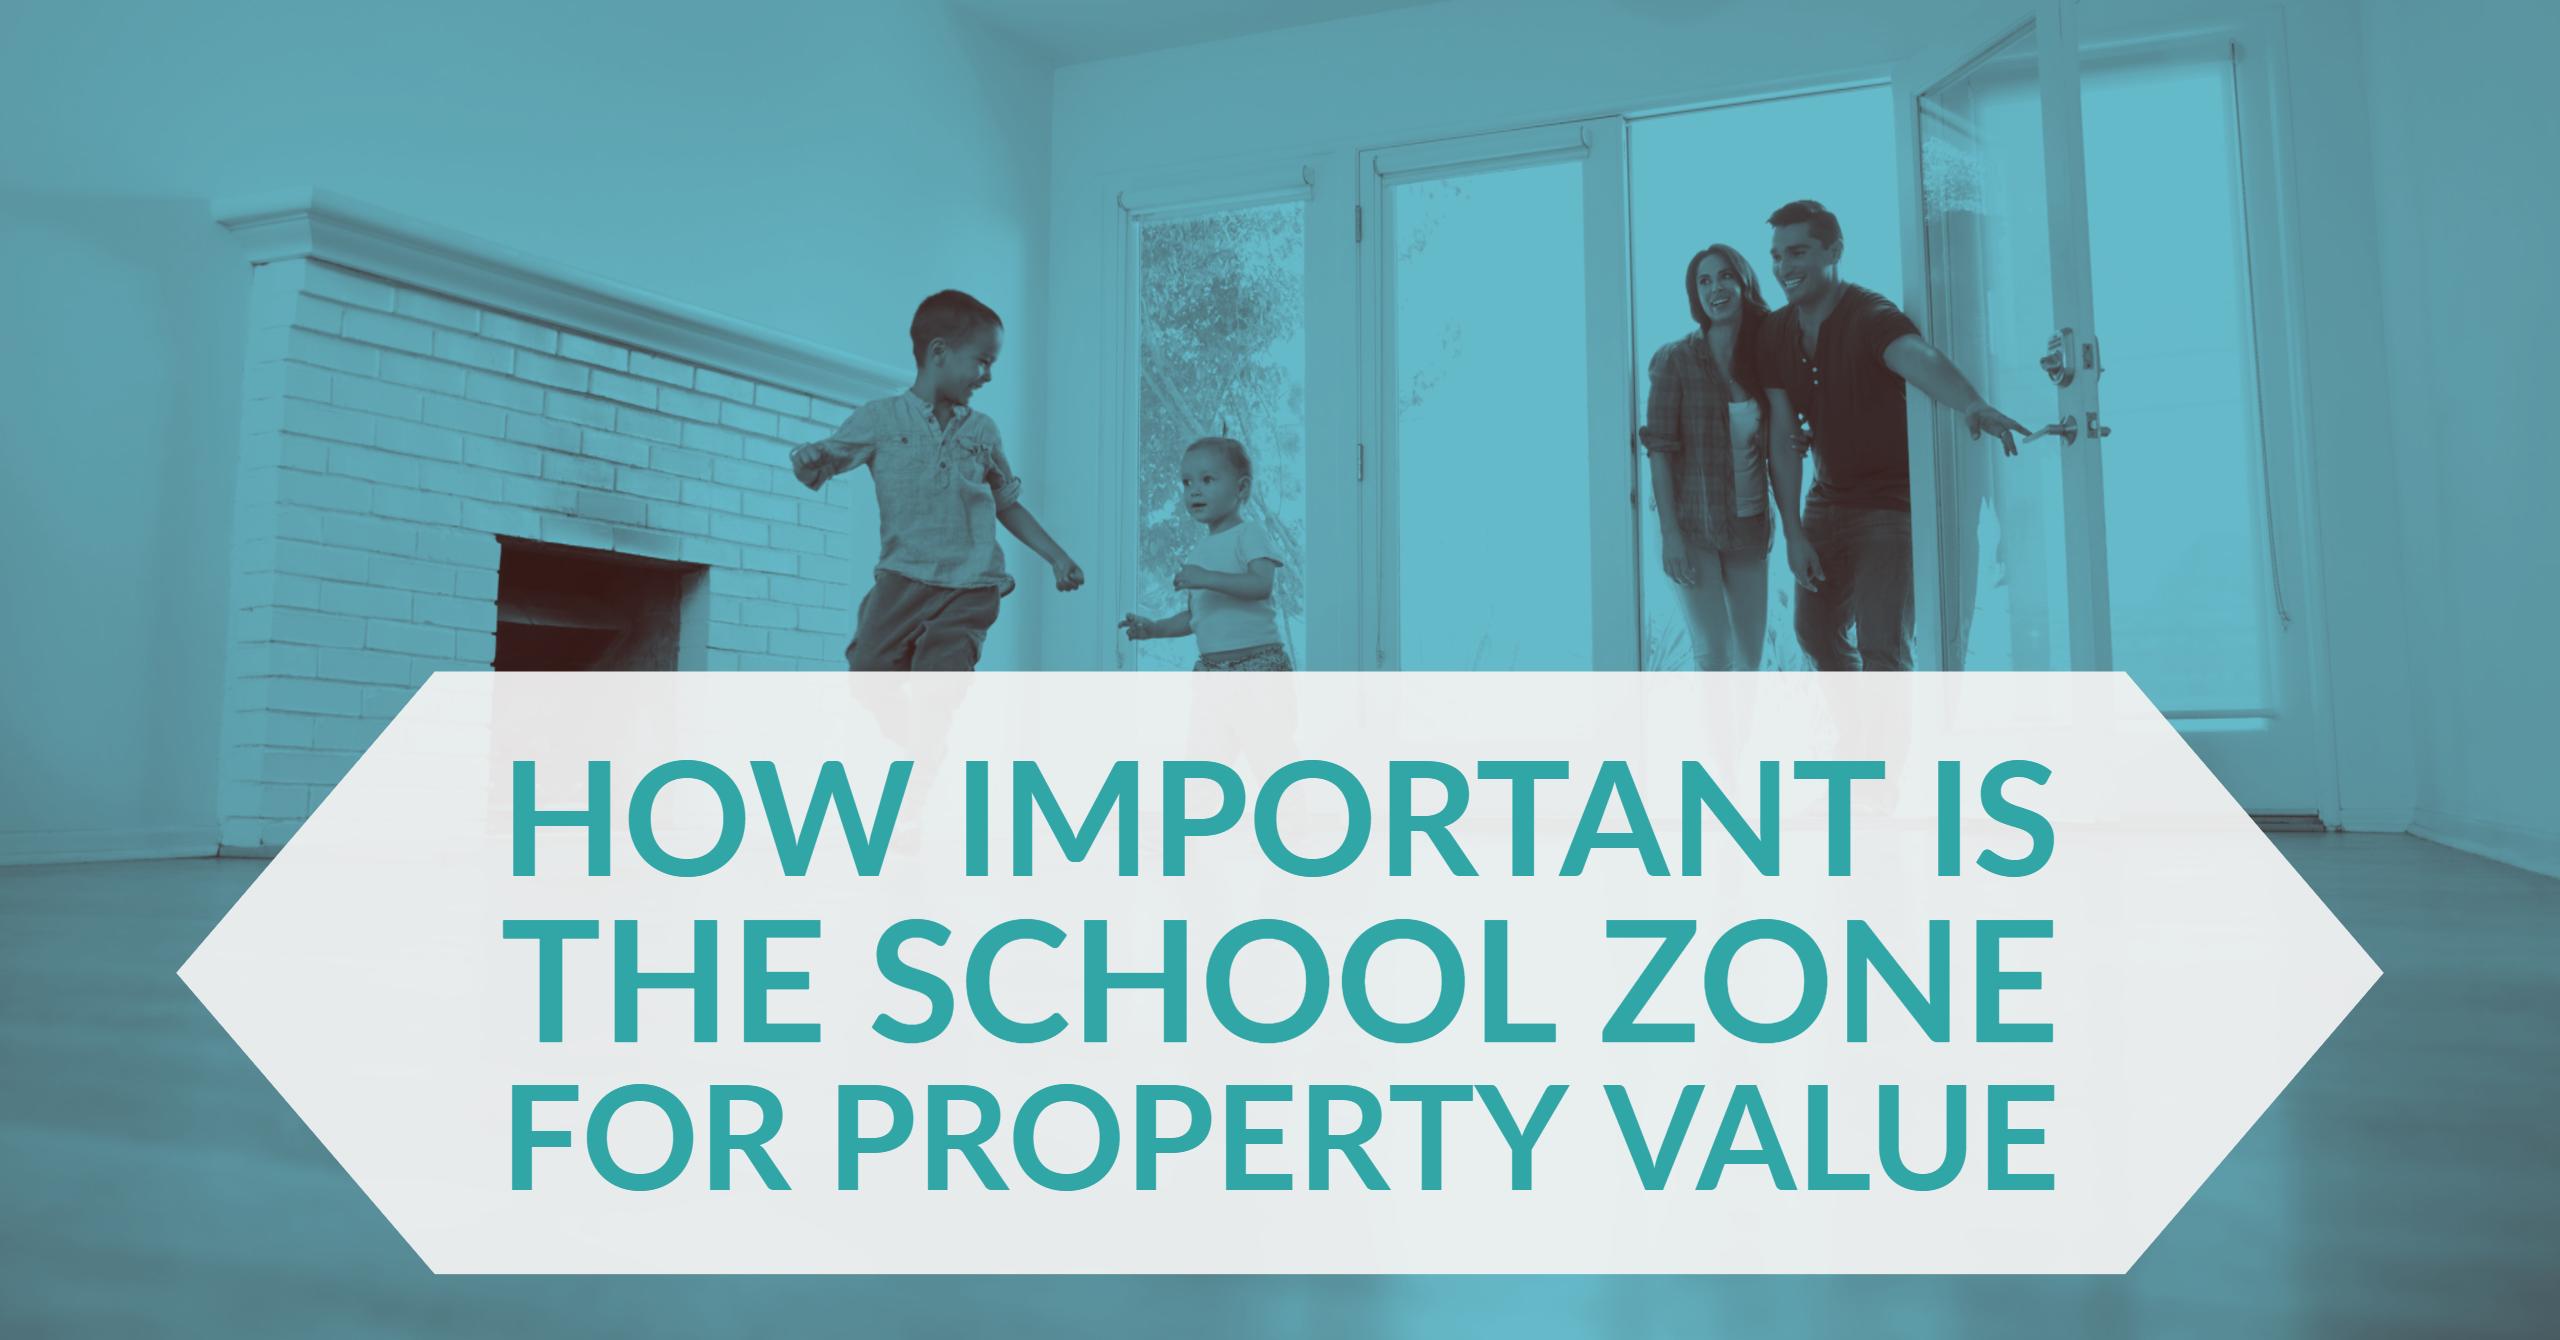 CreditHub - How Important is The School Zone For Property Value